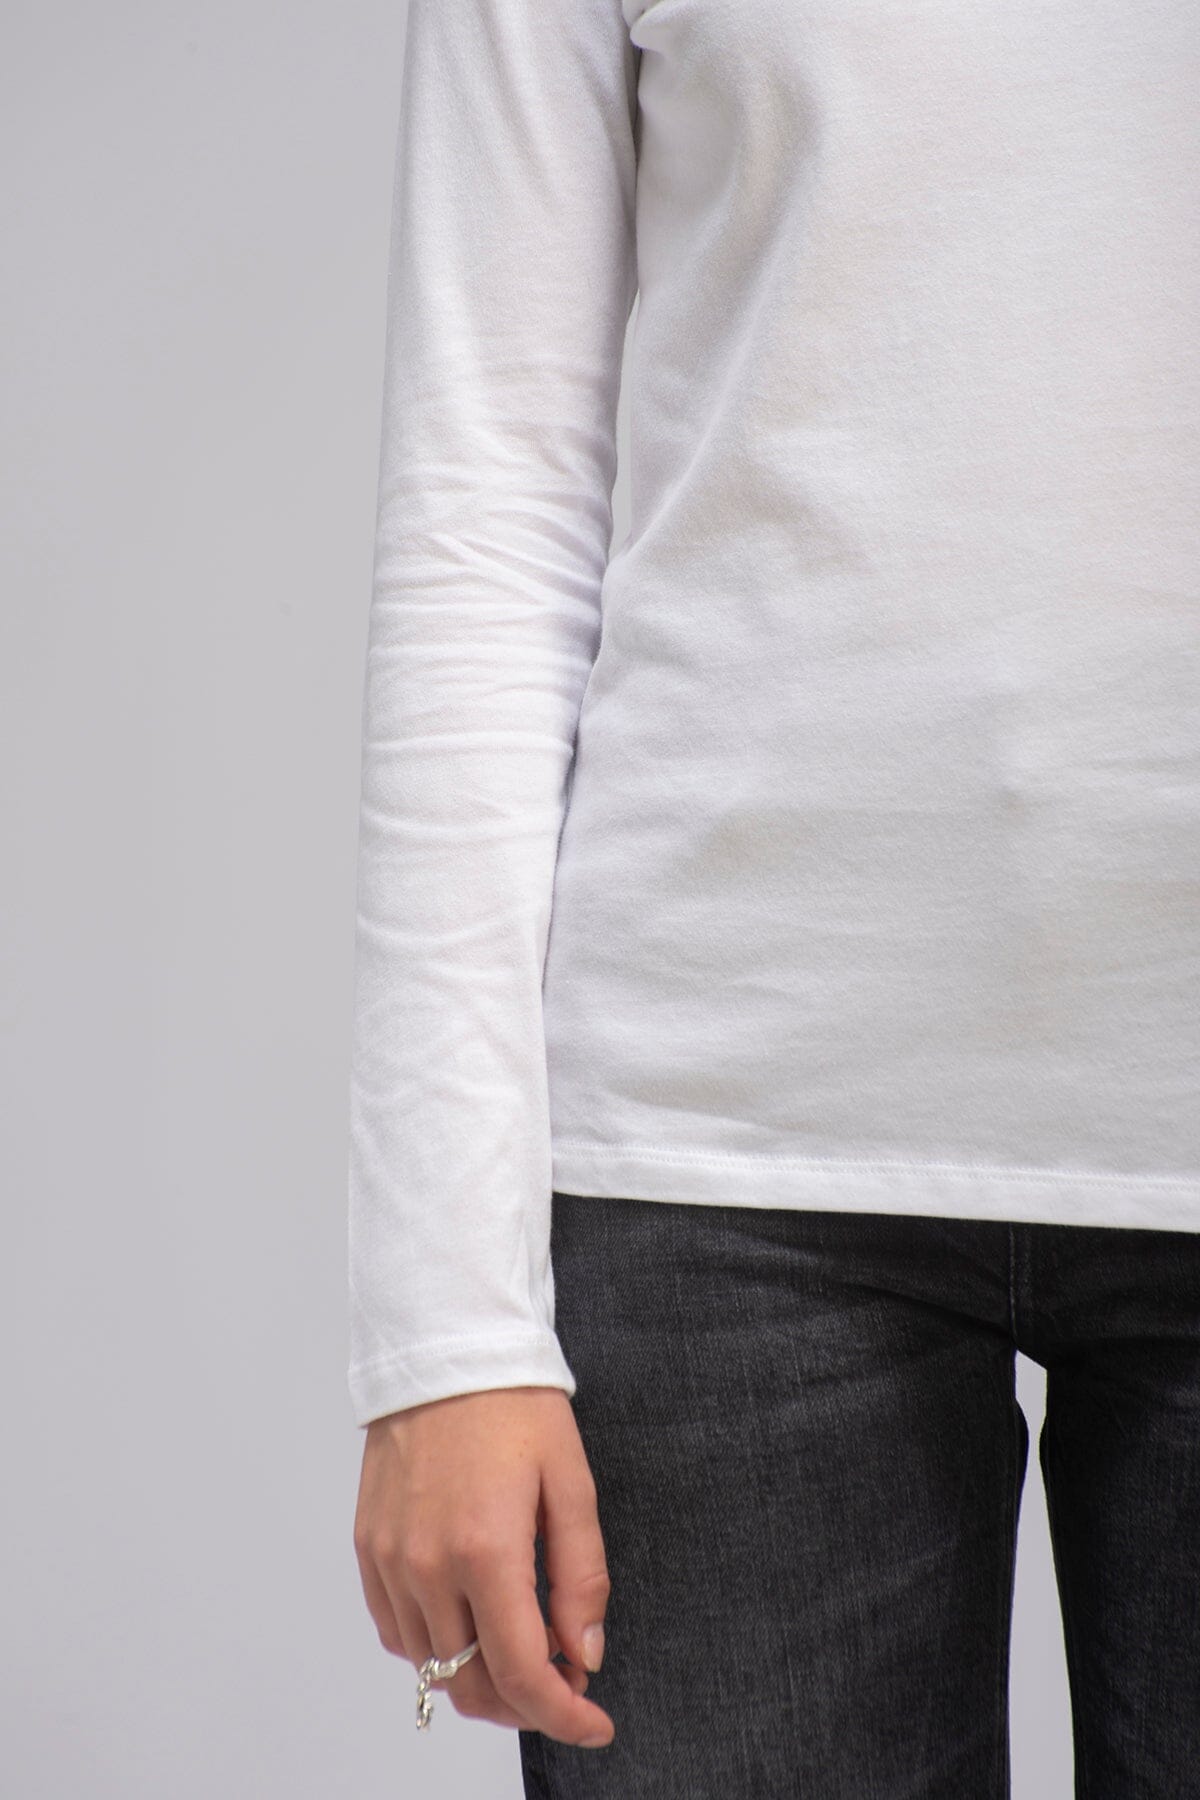 Majestic Filatures Deluxe Cotton Long-Sleeve White T-shirt